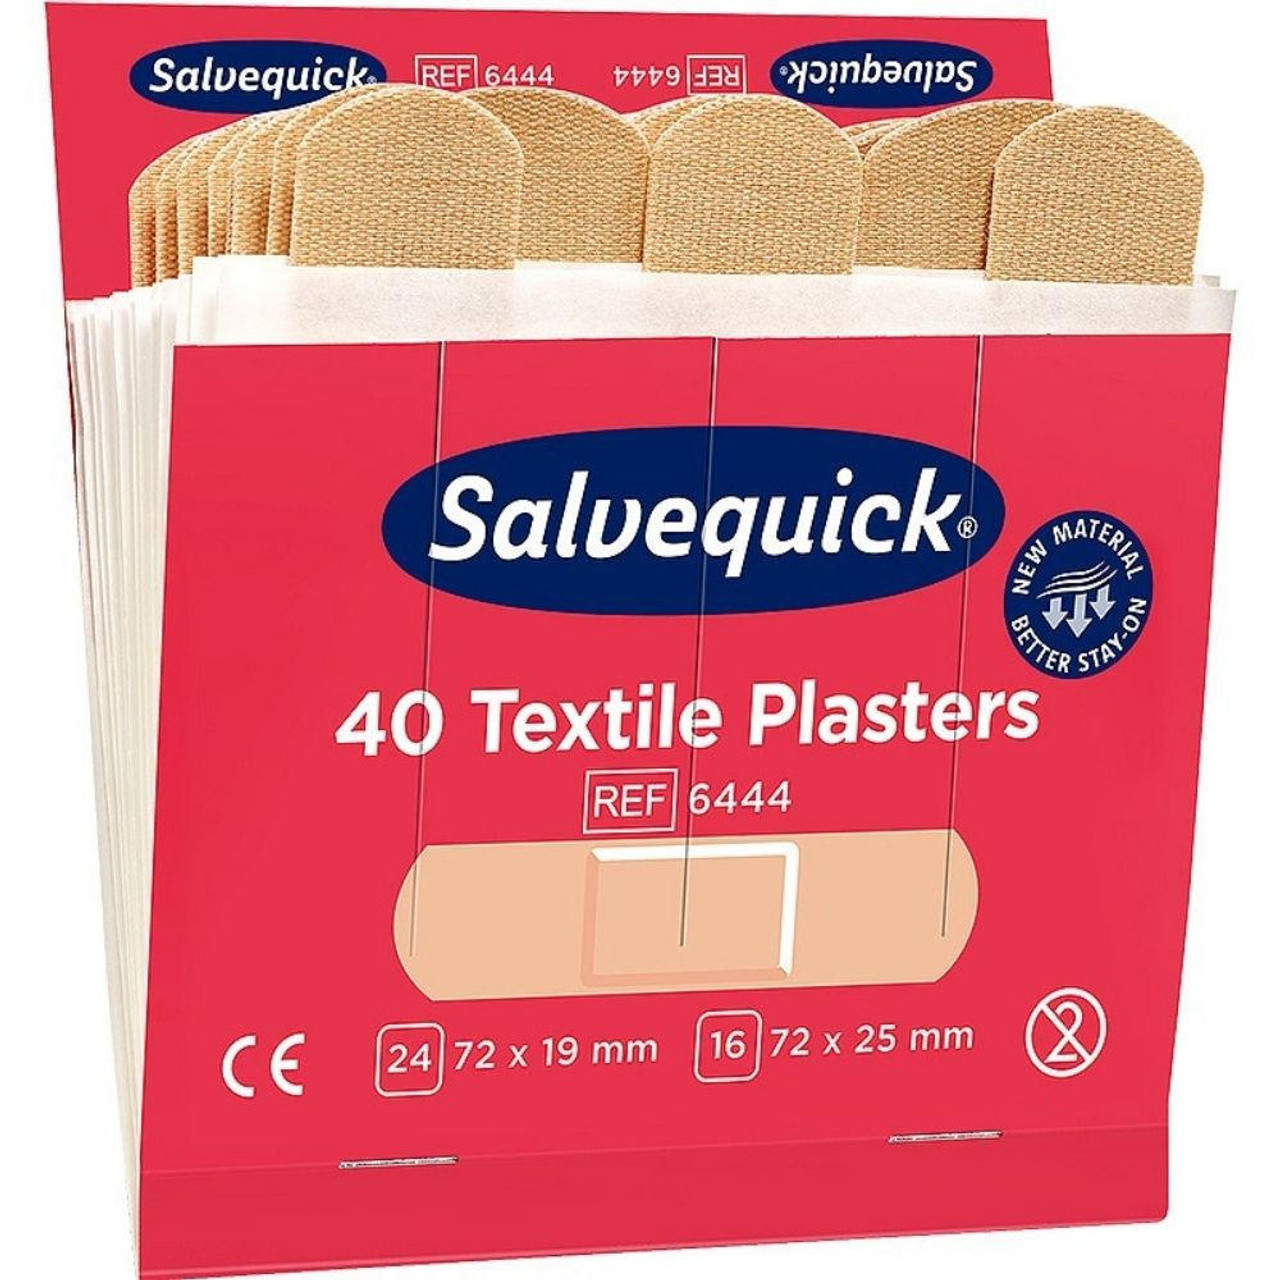 Cederroth Salvequick Plaster Refill Box of 6 Wallets of 40 Fabric Textile Plasters 240 Plasters